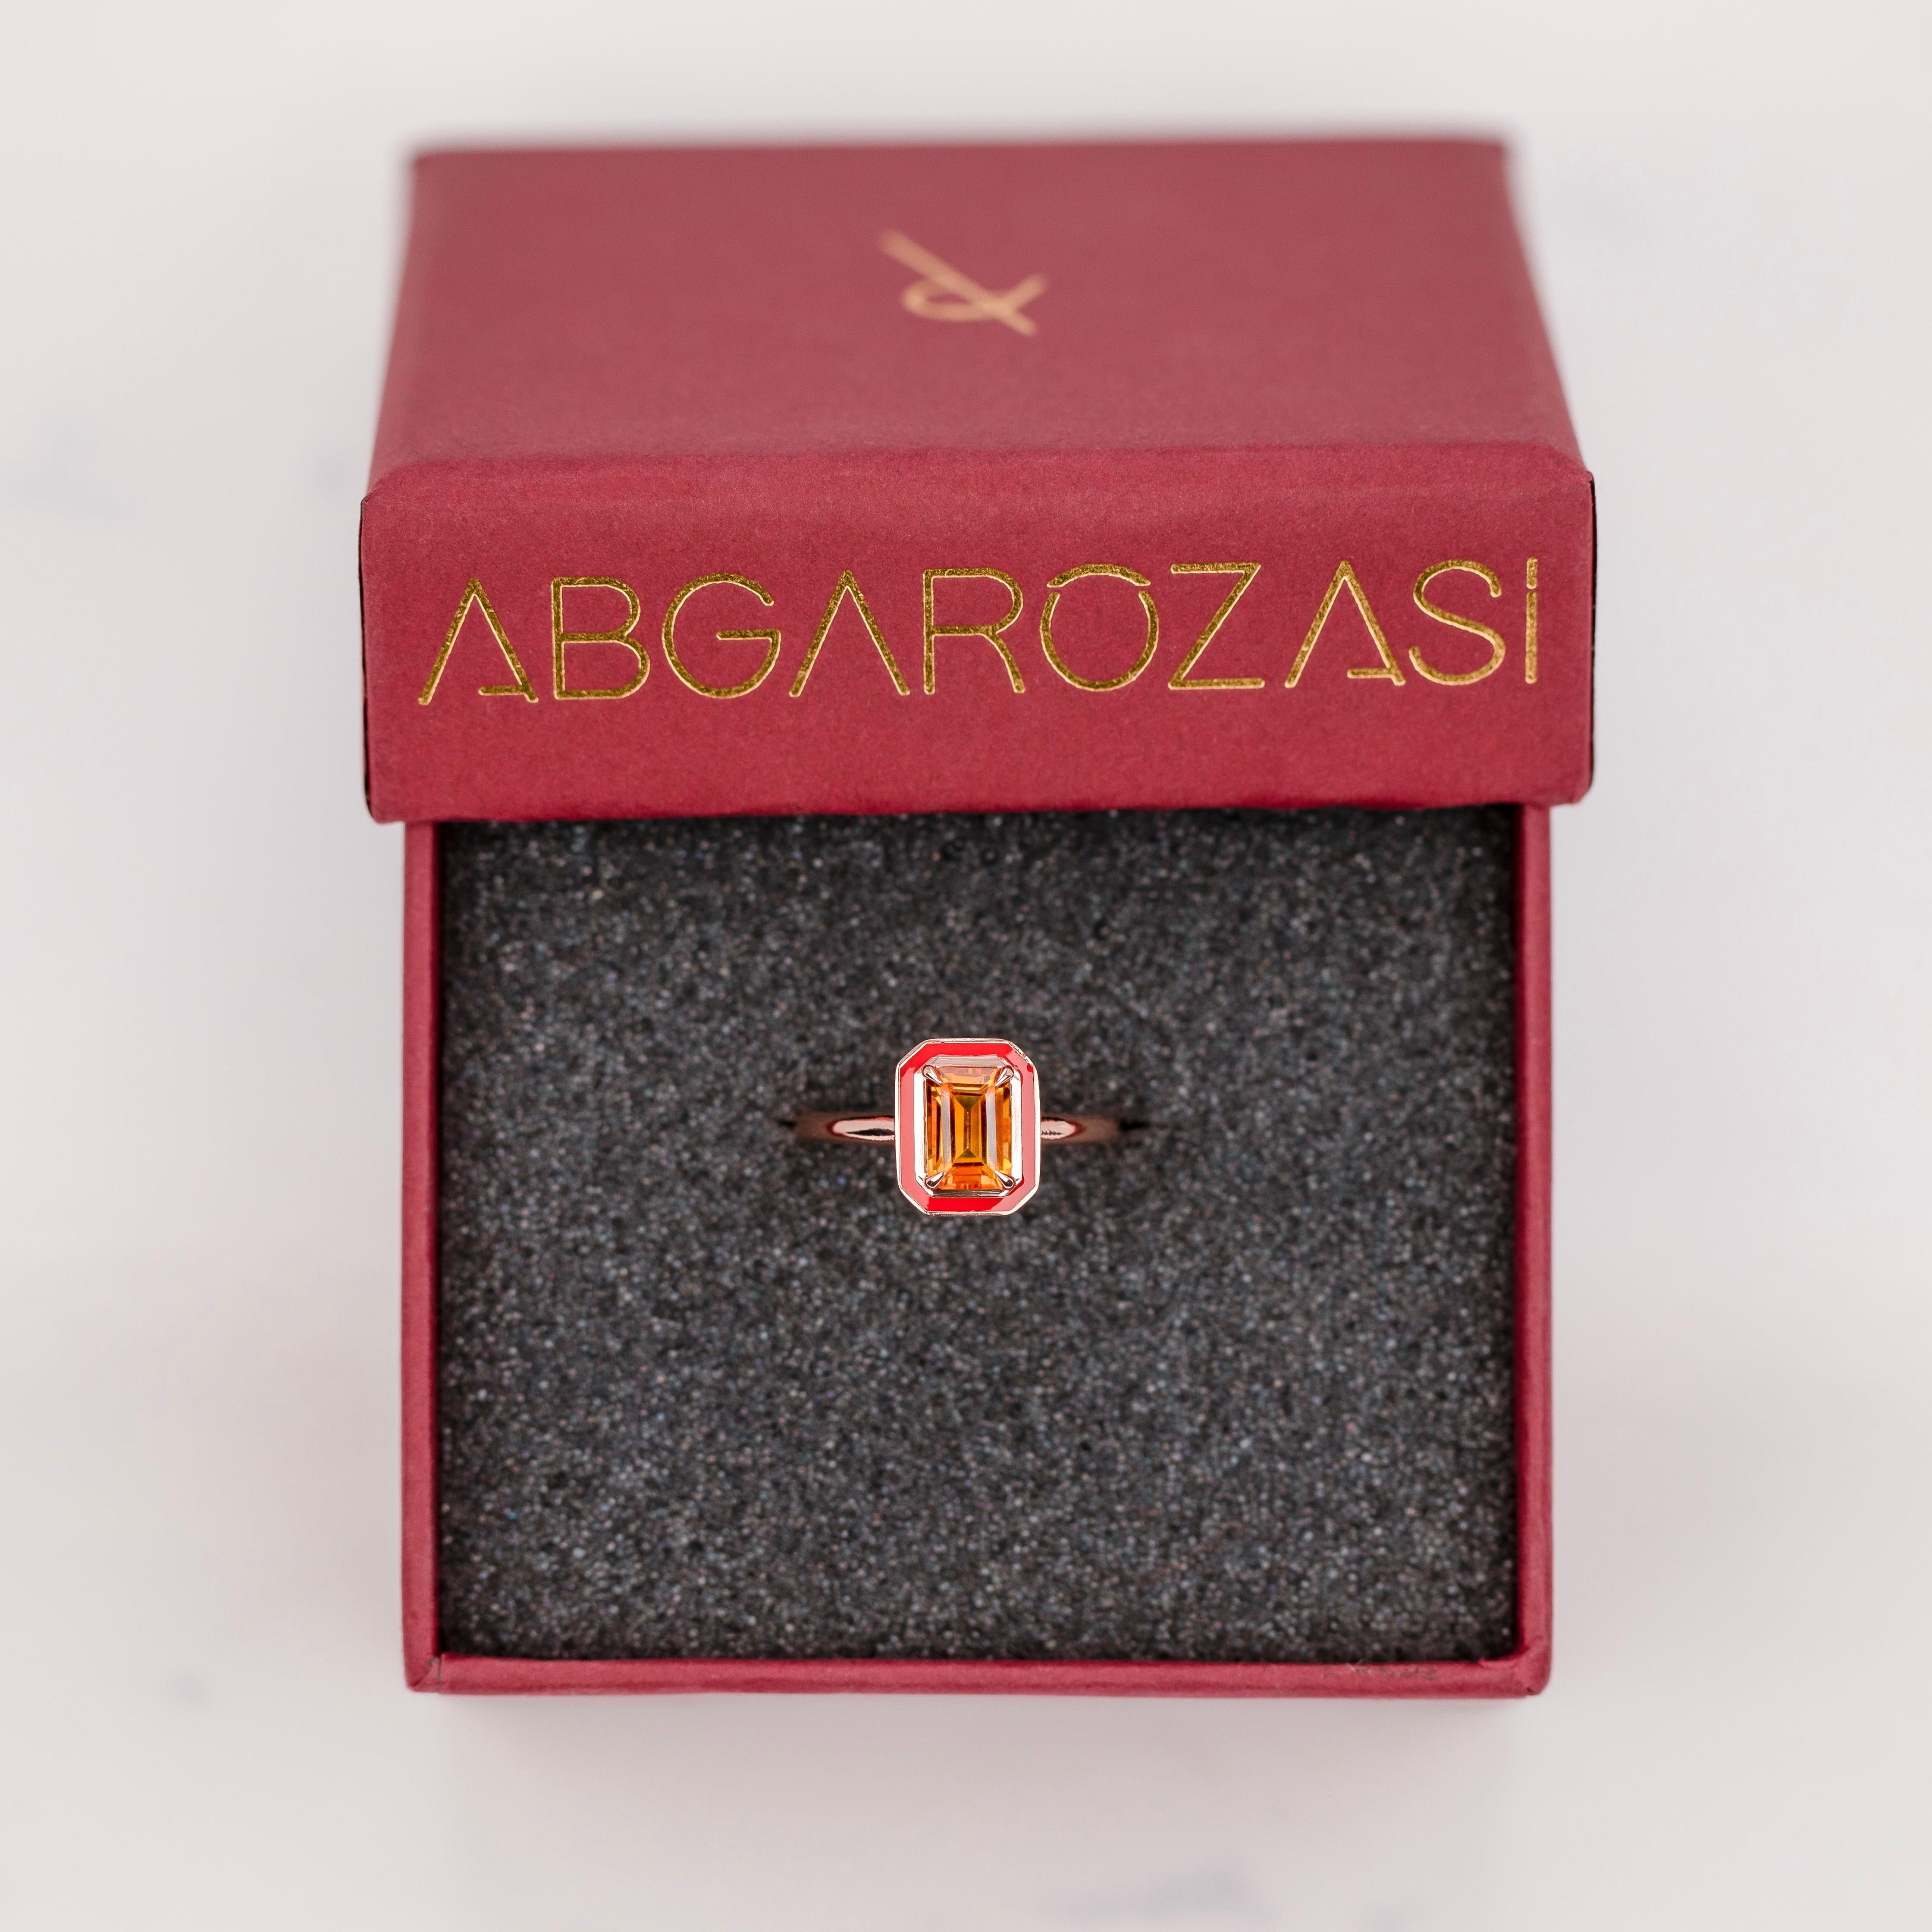 Art Deco Style, 0.90-1.00 Ct Citrine Stone and Colorful Enamel, 14K Gold Ring For Sale 3